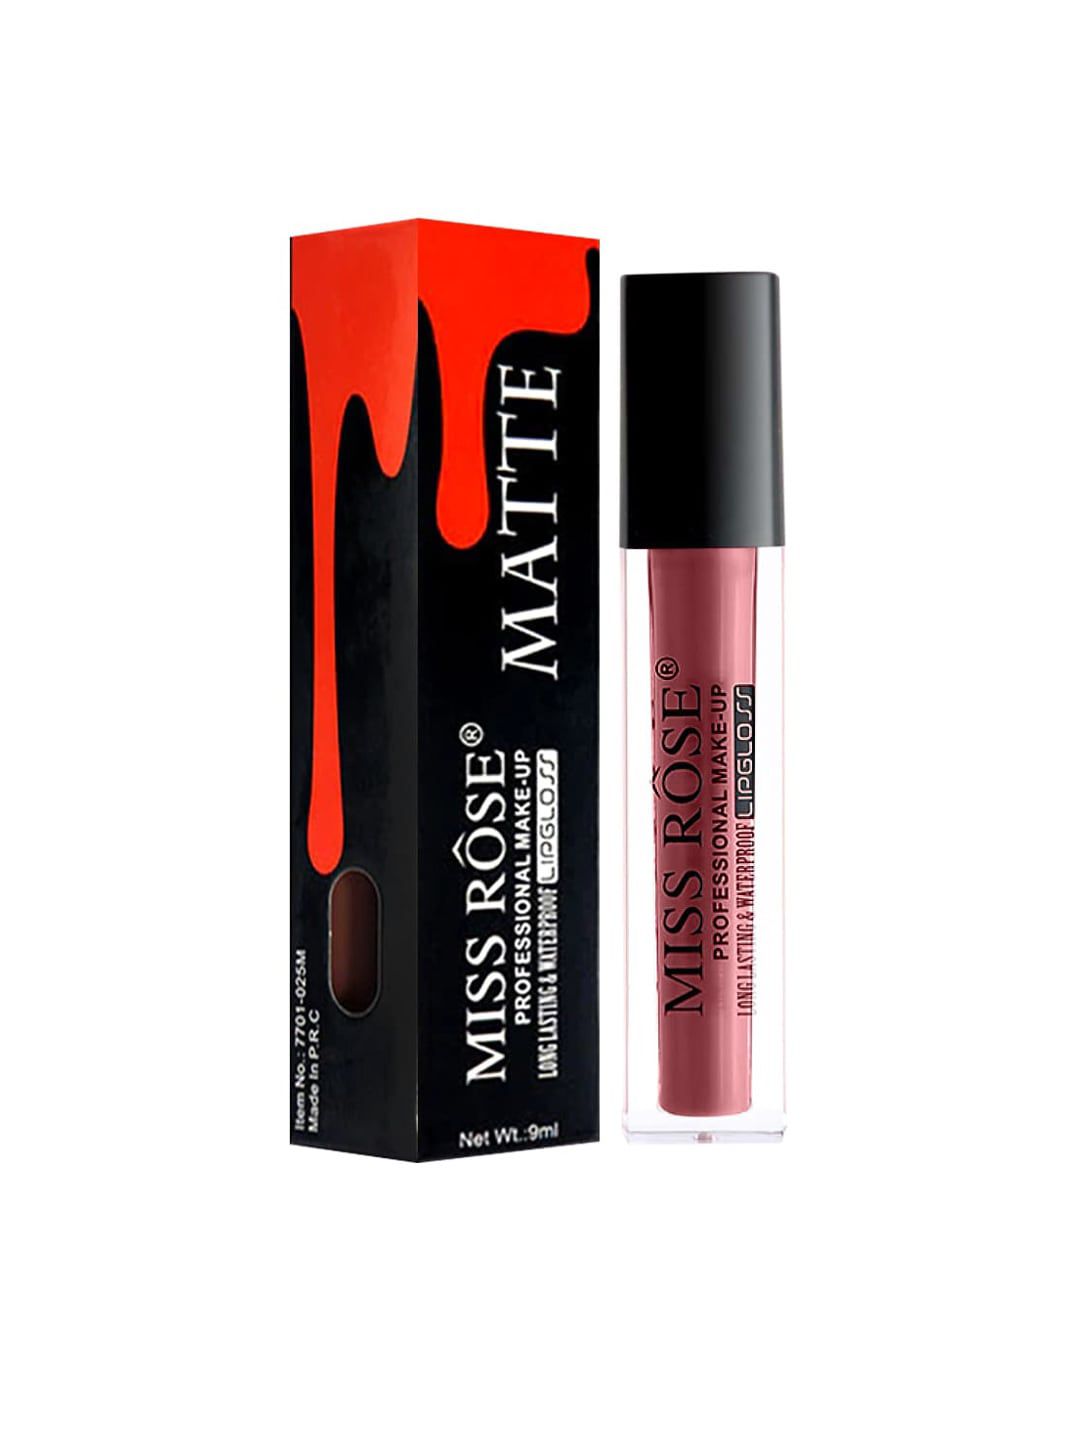 MISS ROSE Shiny Liquid LipGloss 7701-020 02 20 gm Price in India